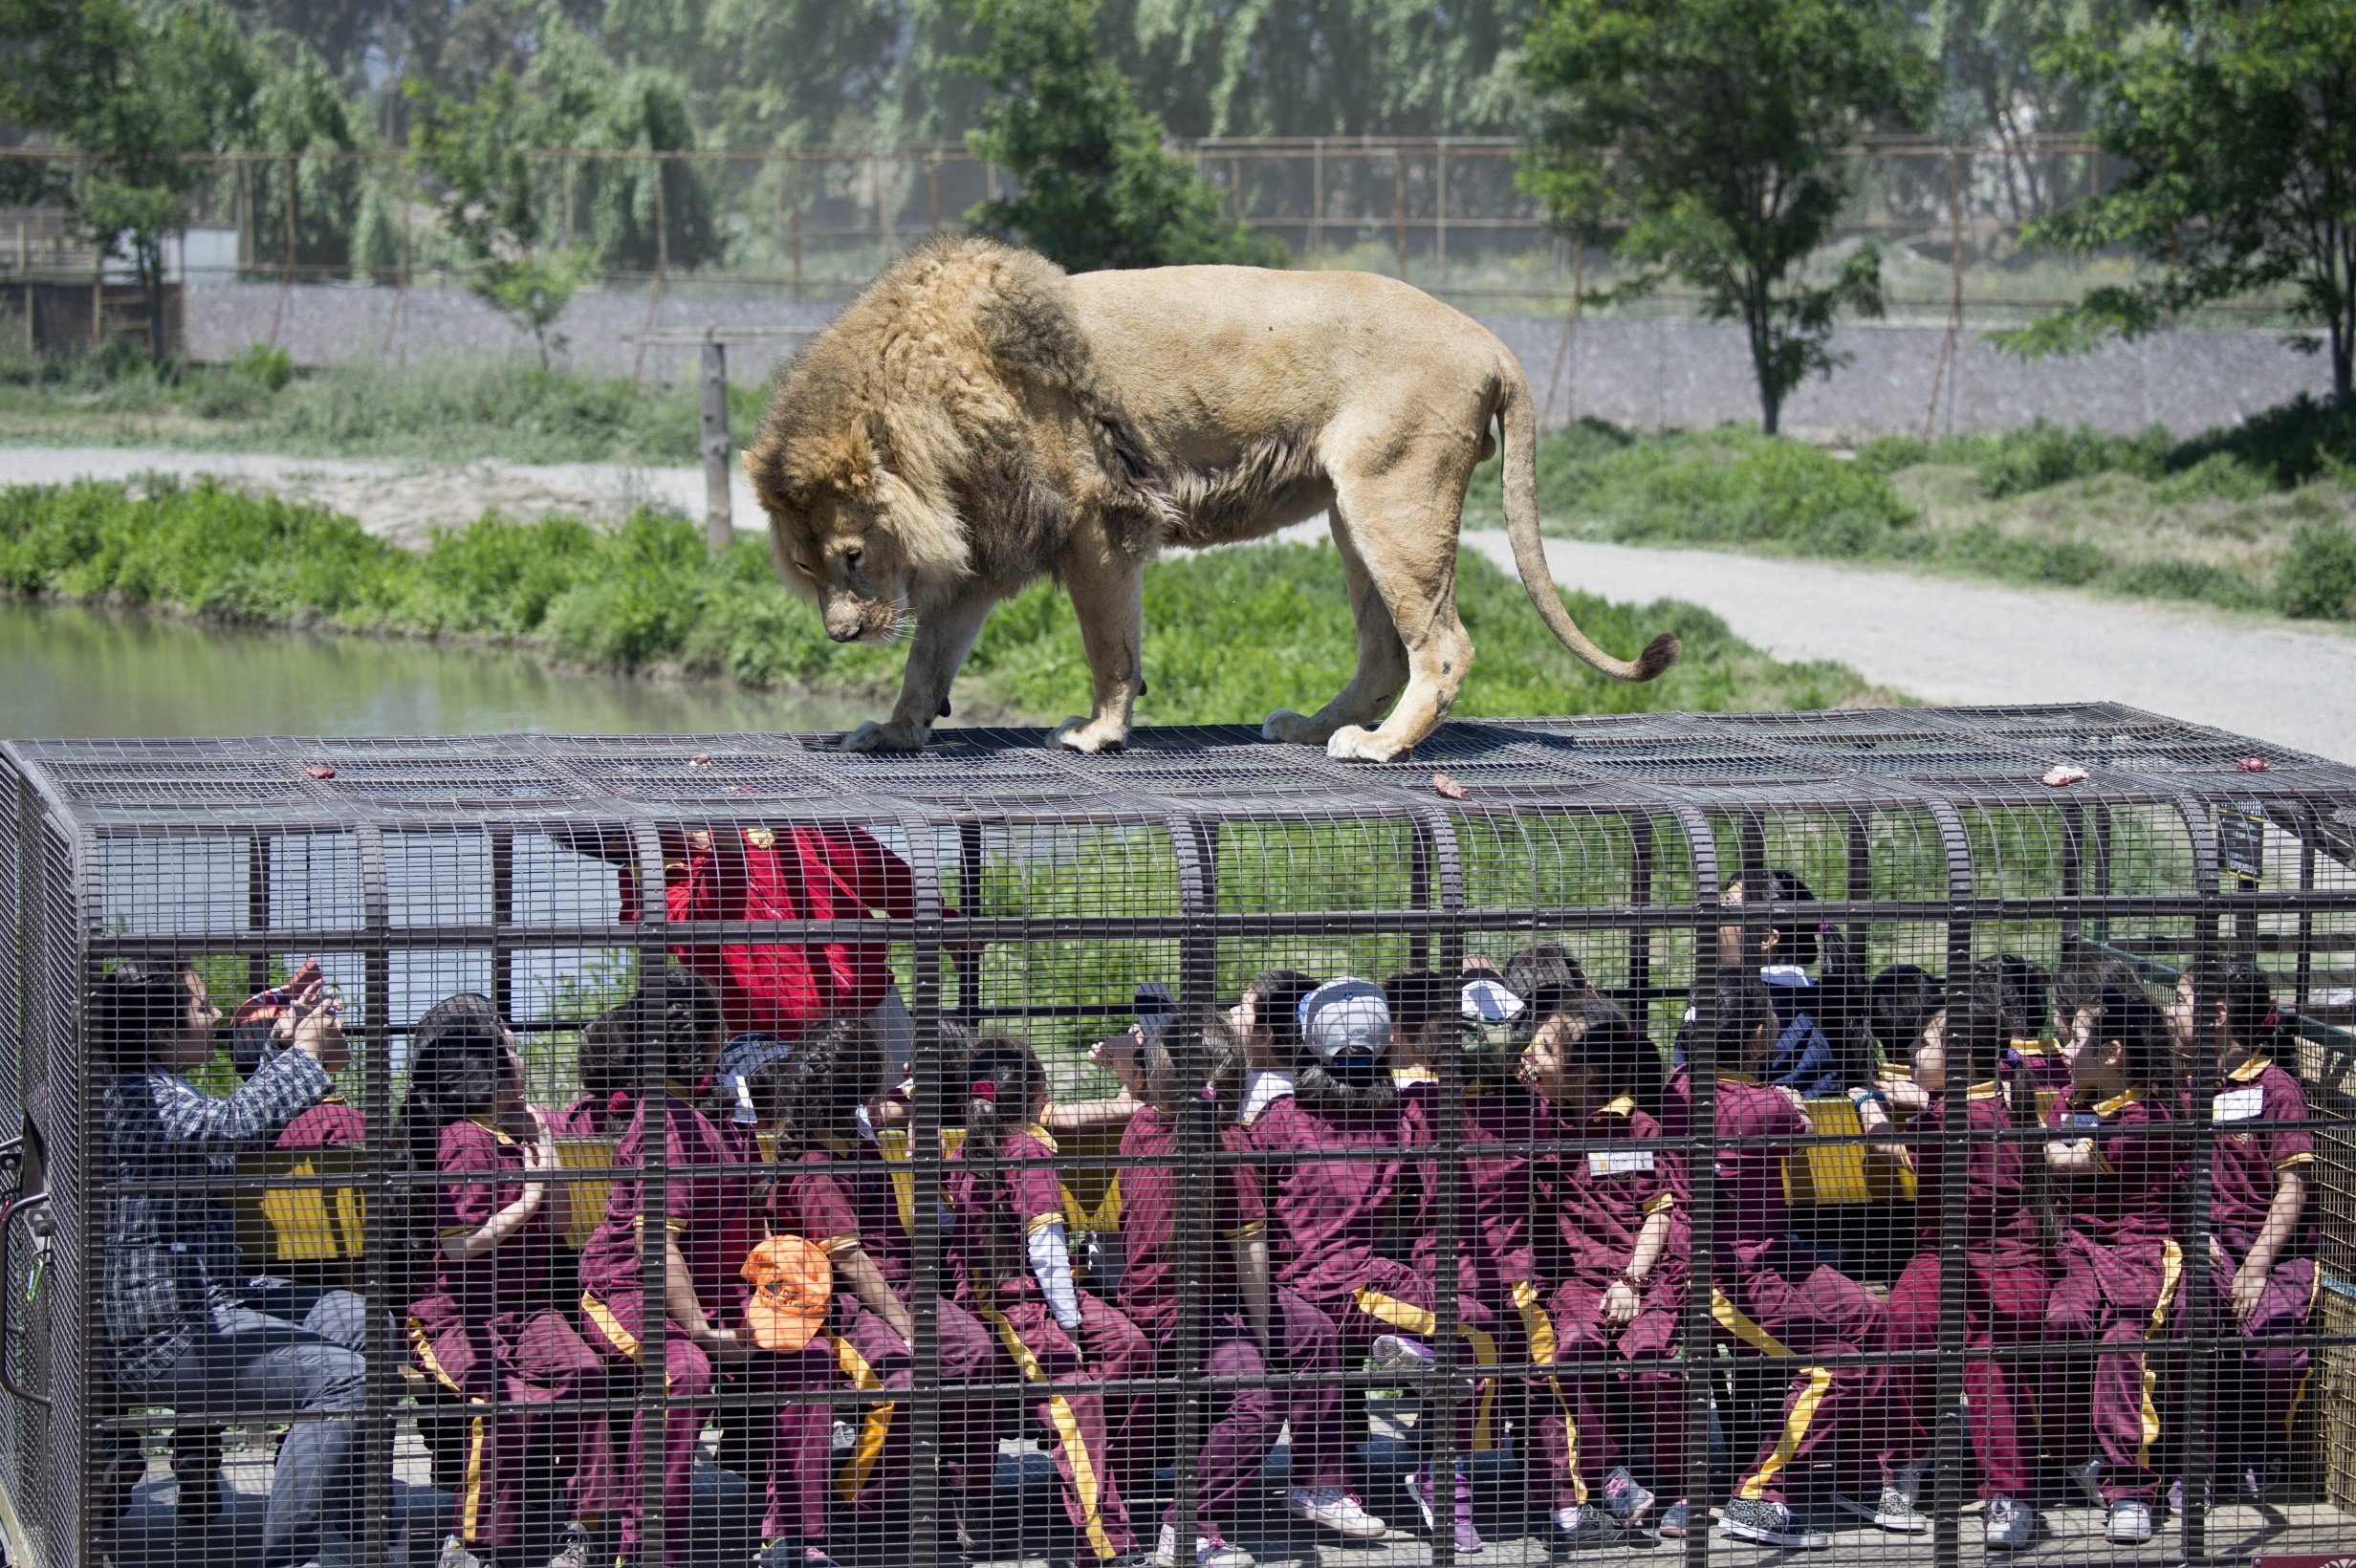 Lions roam free at safari park as visitors sit in cages for close-up  experience | South China Morning Post